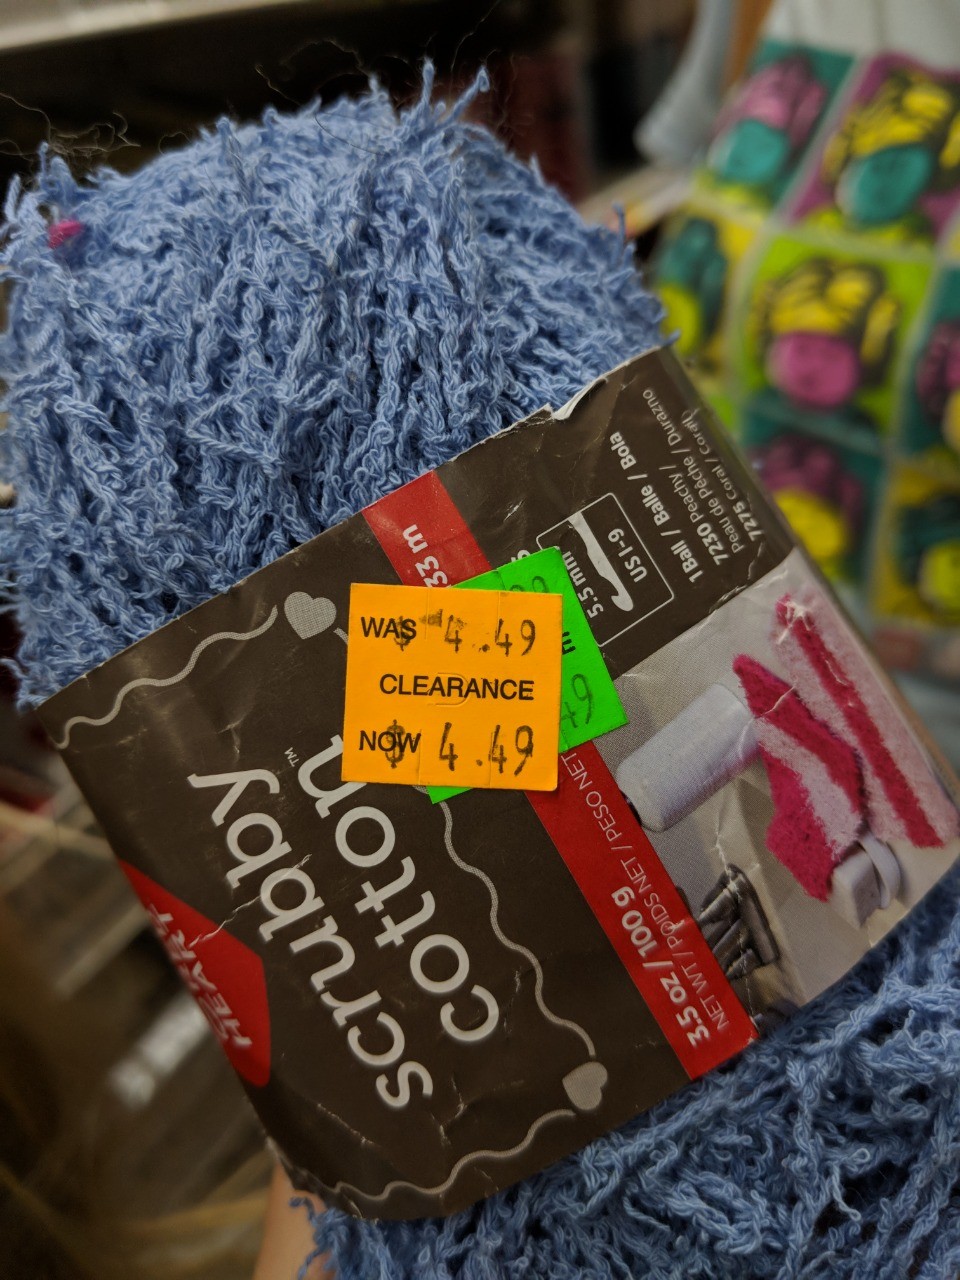 Ball of yarn with a price tag: Clearance! Was 4.49. Now 4.49.